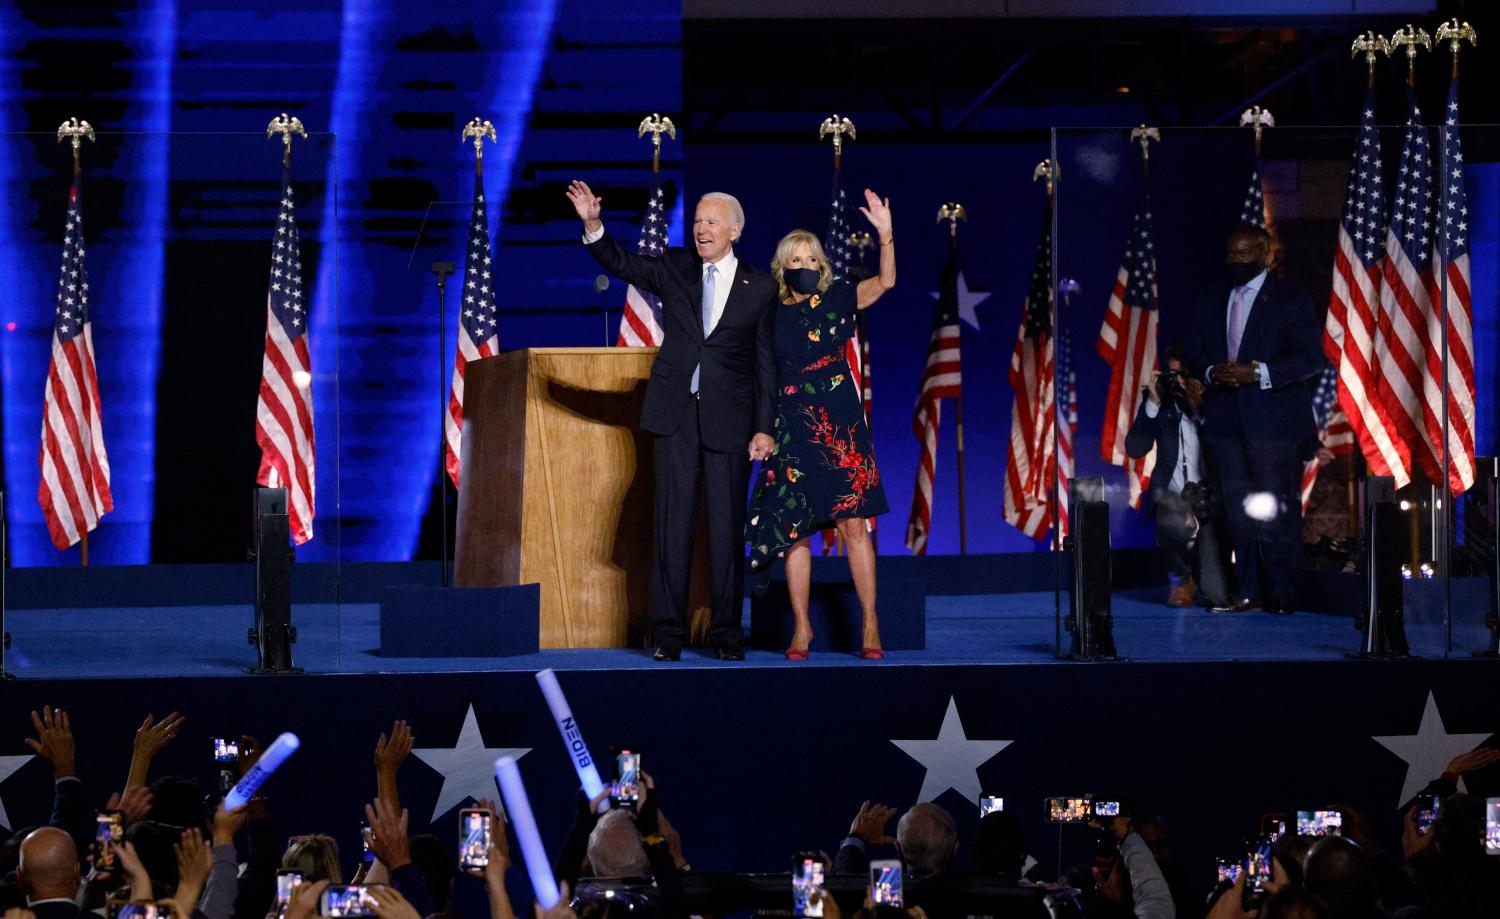 Democratic 2020 U.S. presidential nominee Joe Biden and his wife Jill wave to the crowd after speaking at his election rally, after the news media announced that Biden has won the 2020 U.S. presidential election over President Donald Trump, in Wilmington, Delaware, U.S., November 7, 2020. REUTERS/Jim Bourg